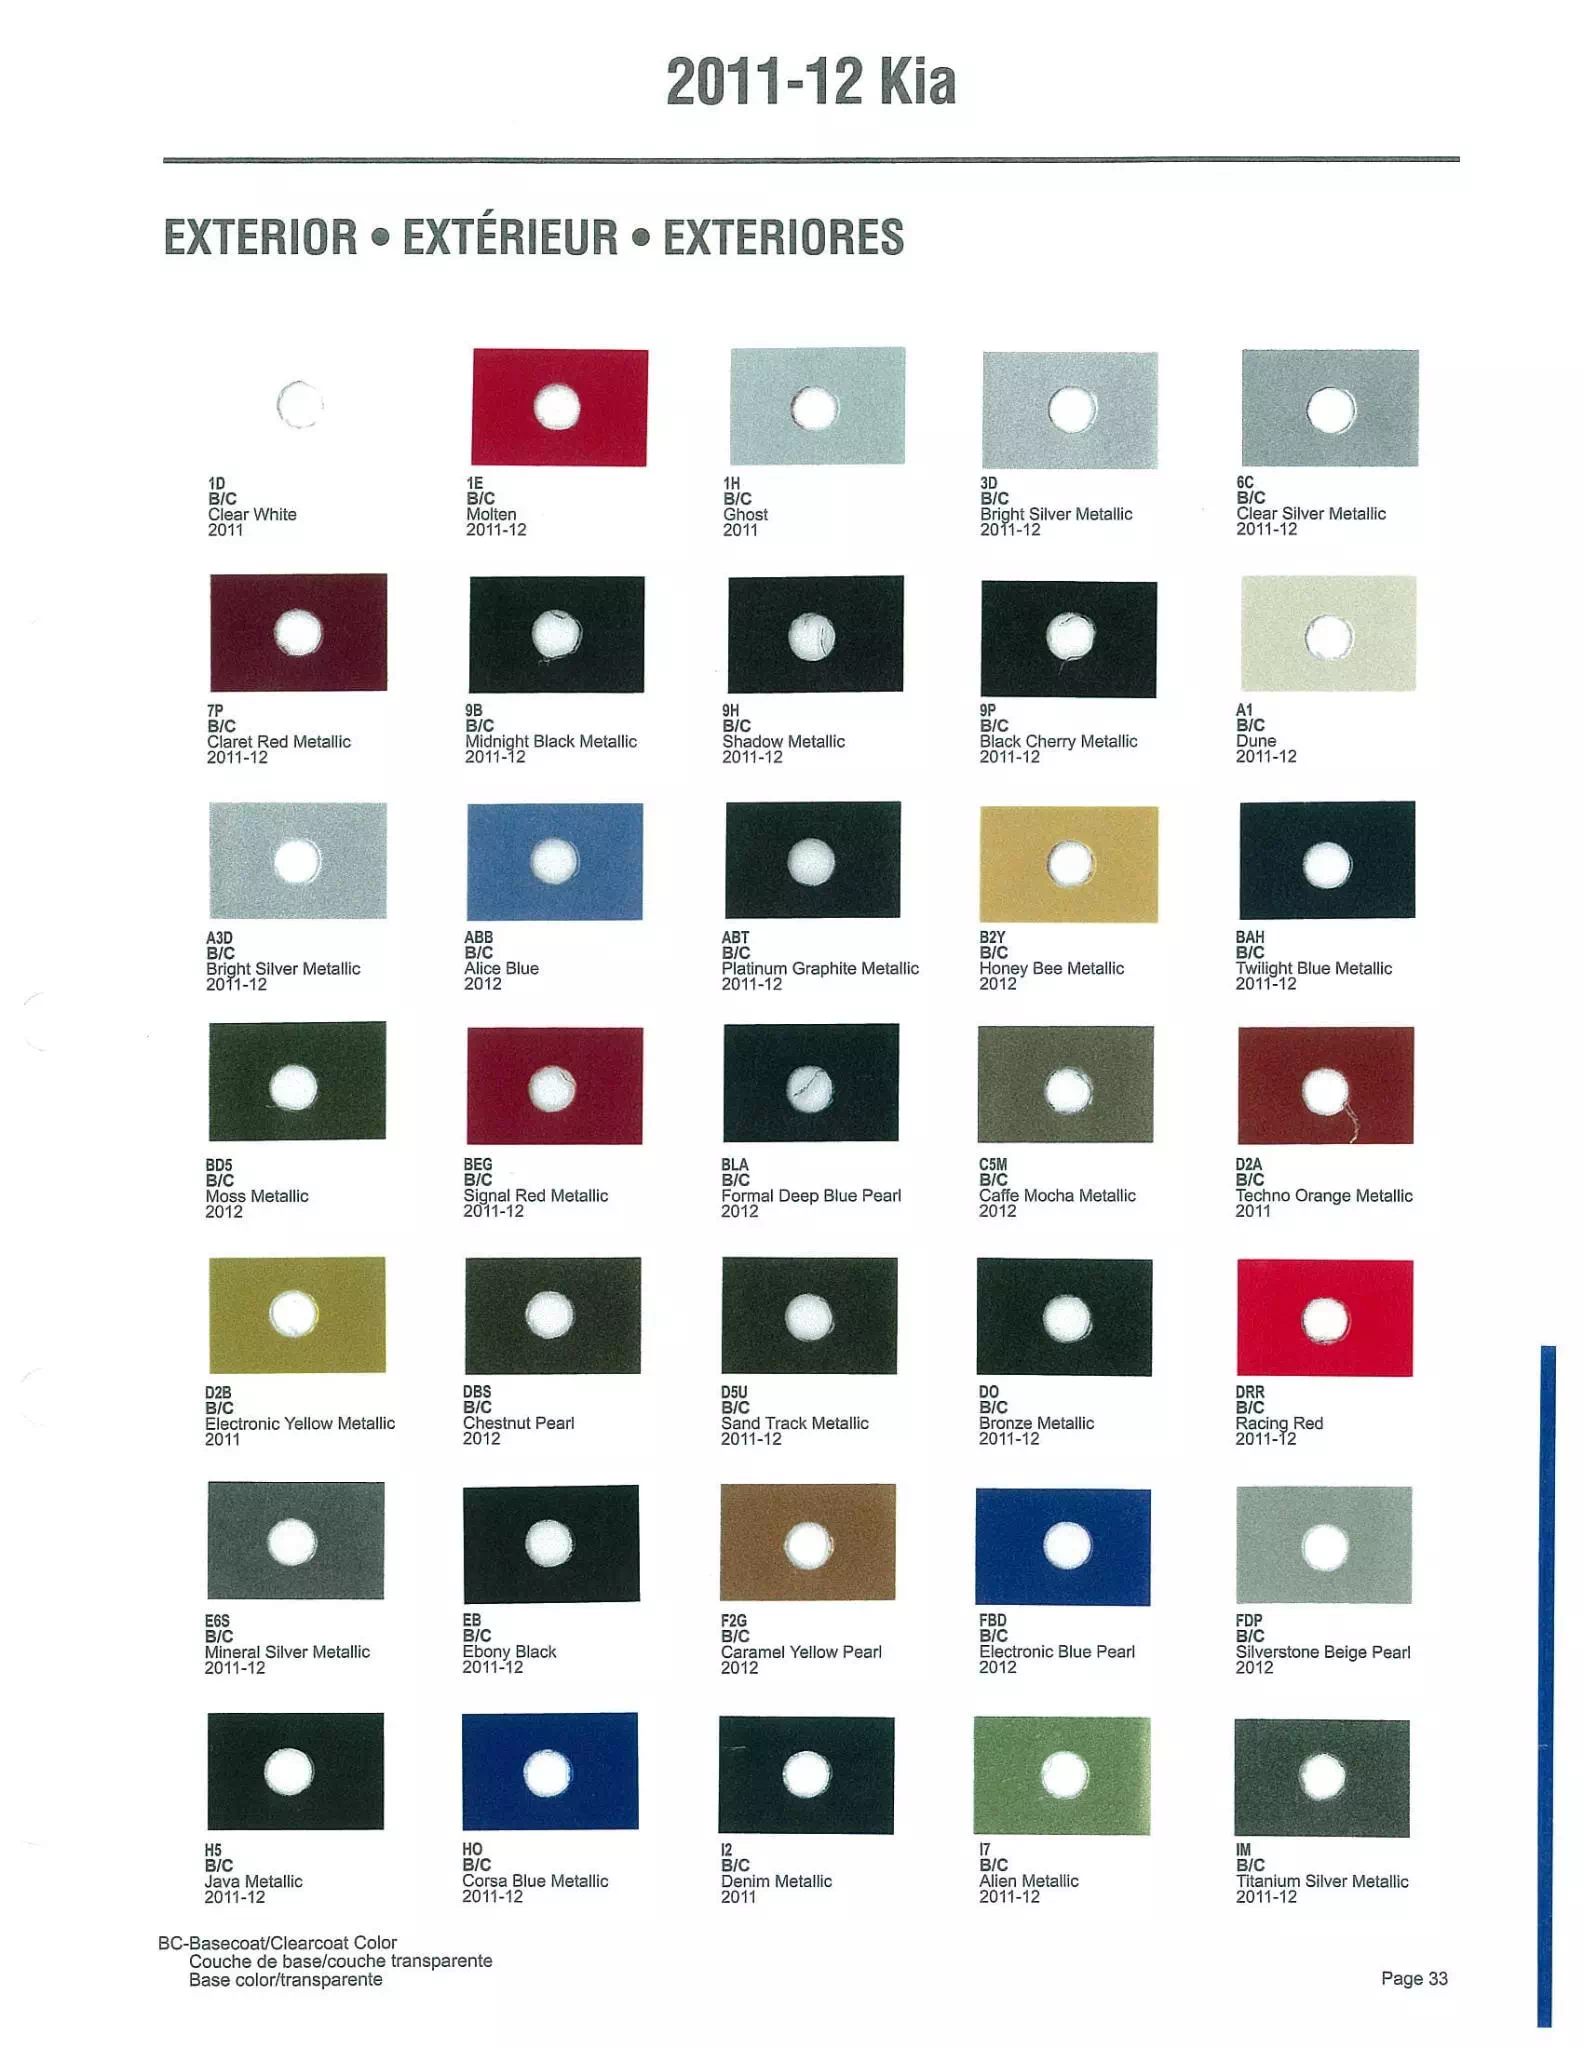 Exterior Paint Colors for Kia Vehicles in 2011 and 2012